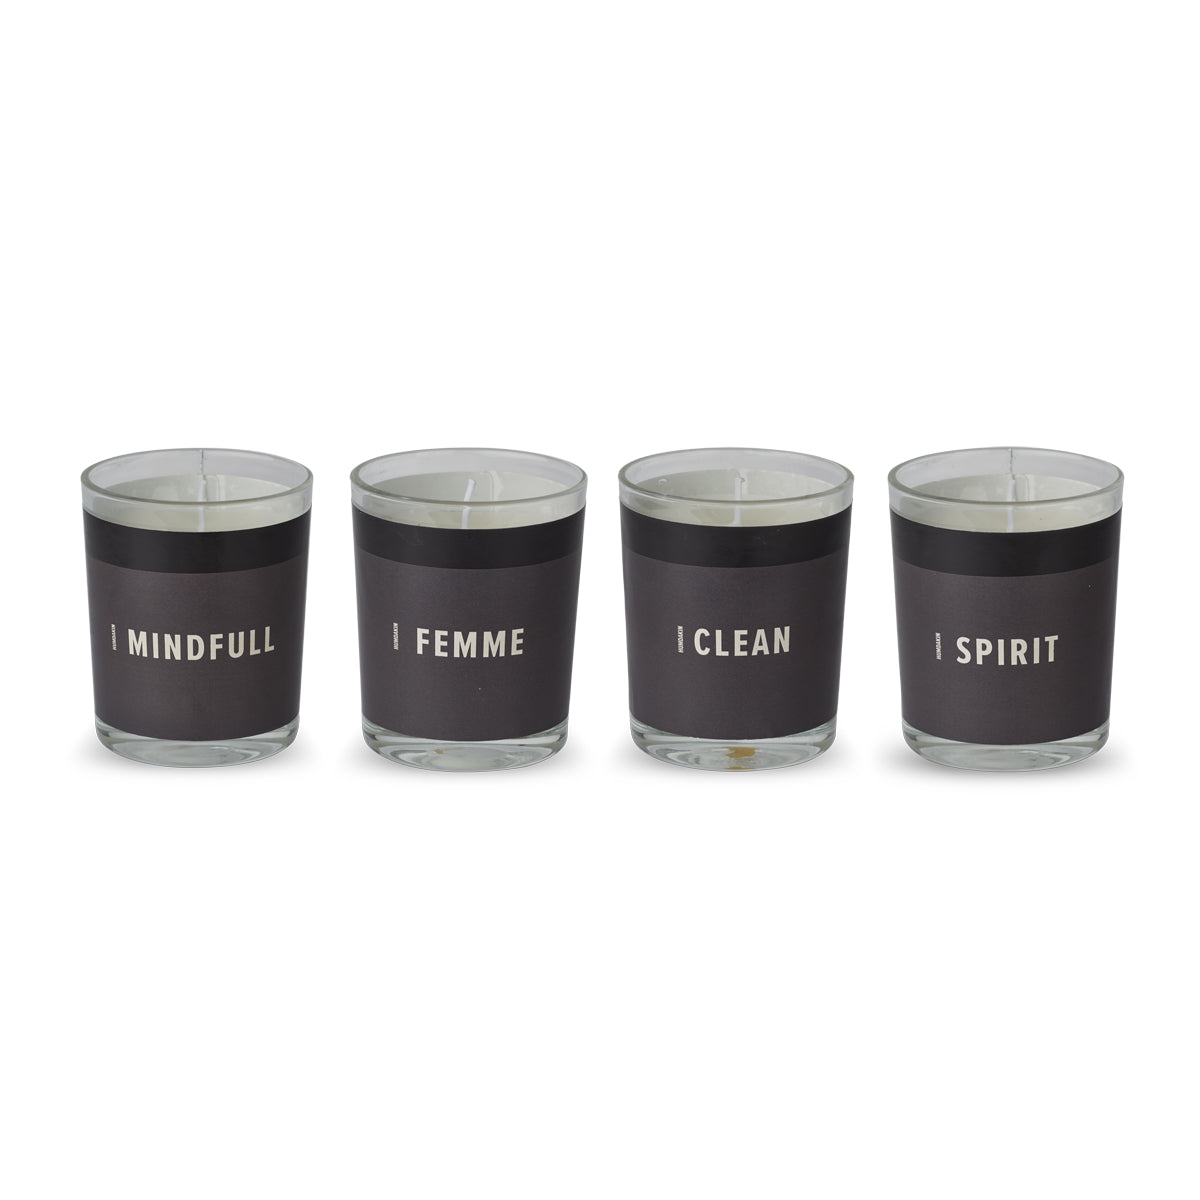 HUMDAKIN "Karma Cleaning" - scented candles, 4 pack Candle